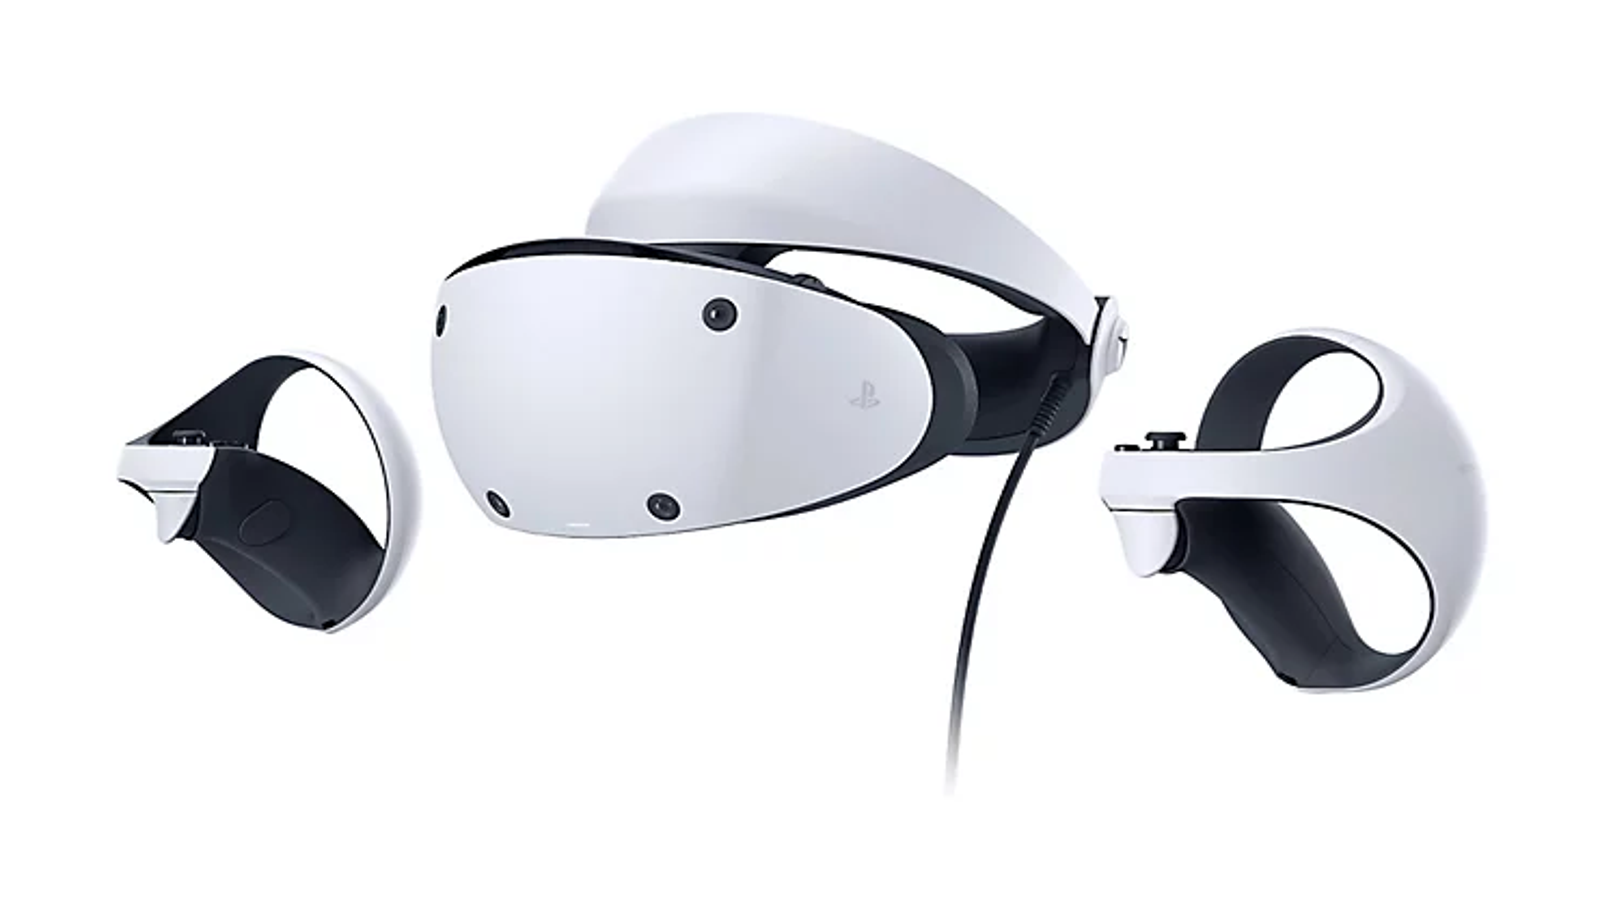 Bloomberg: PlayStation VR2 headset has had a weak start, analysts